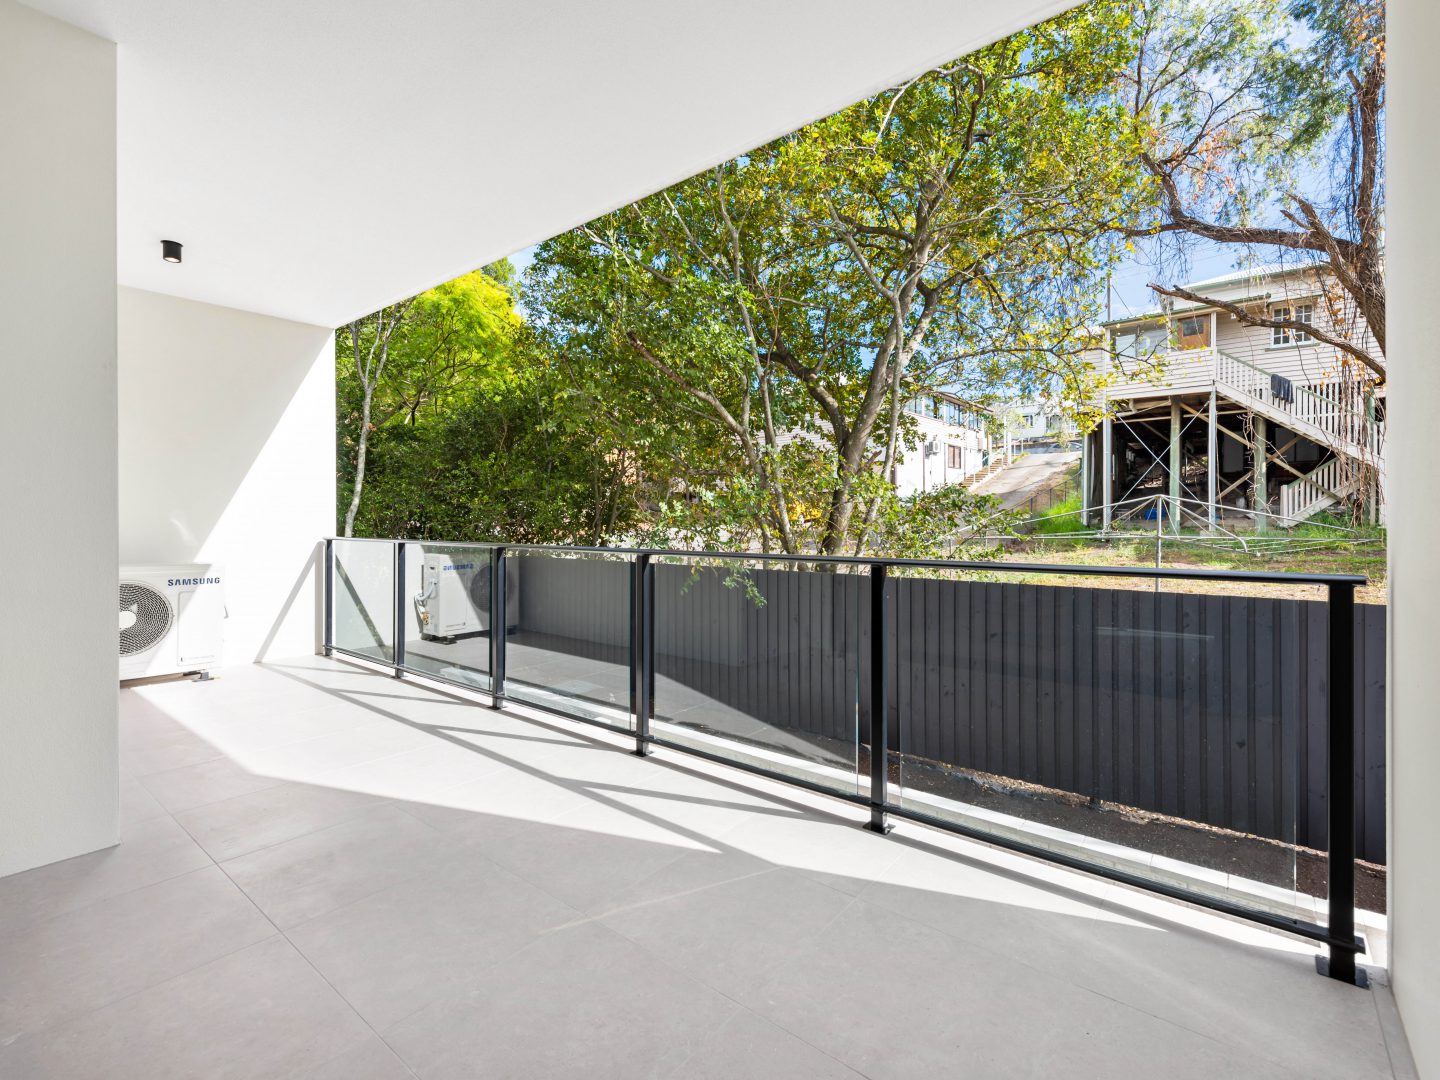 Quattro Indooroopilly Balcony (image supplied by the developer)